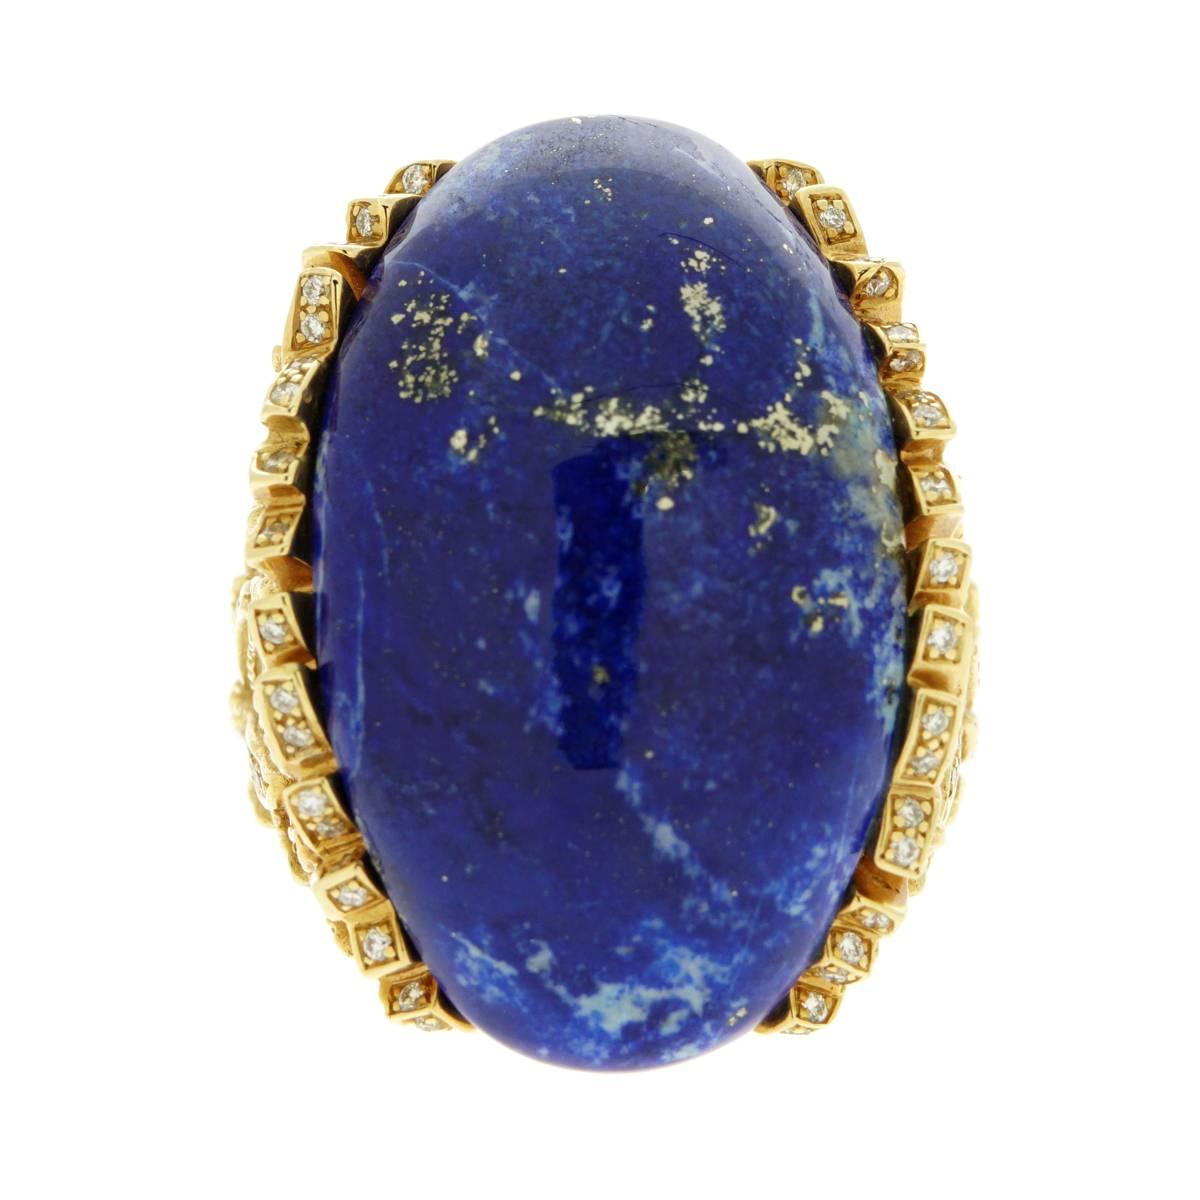 A magnificent custom piece by Rodney Rayner featuring a Lapis Lazuli central stone measuring 1.25